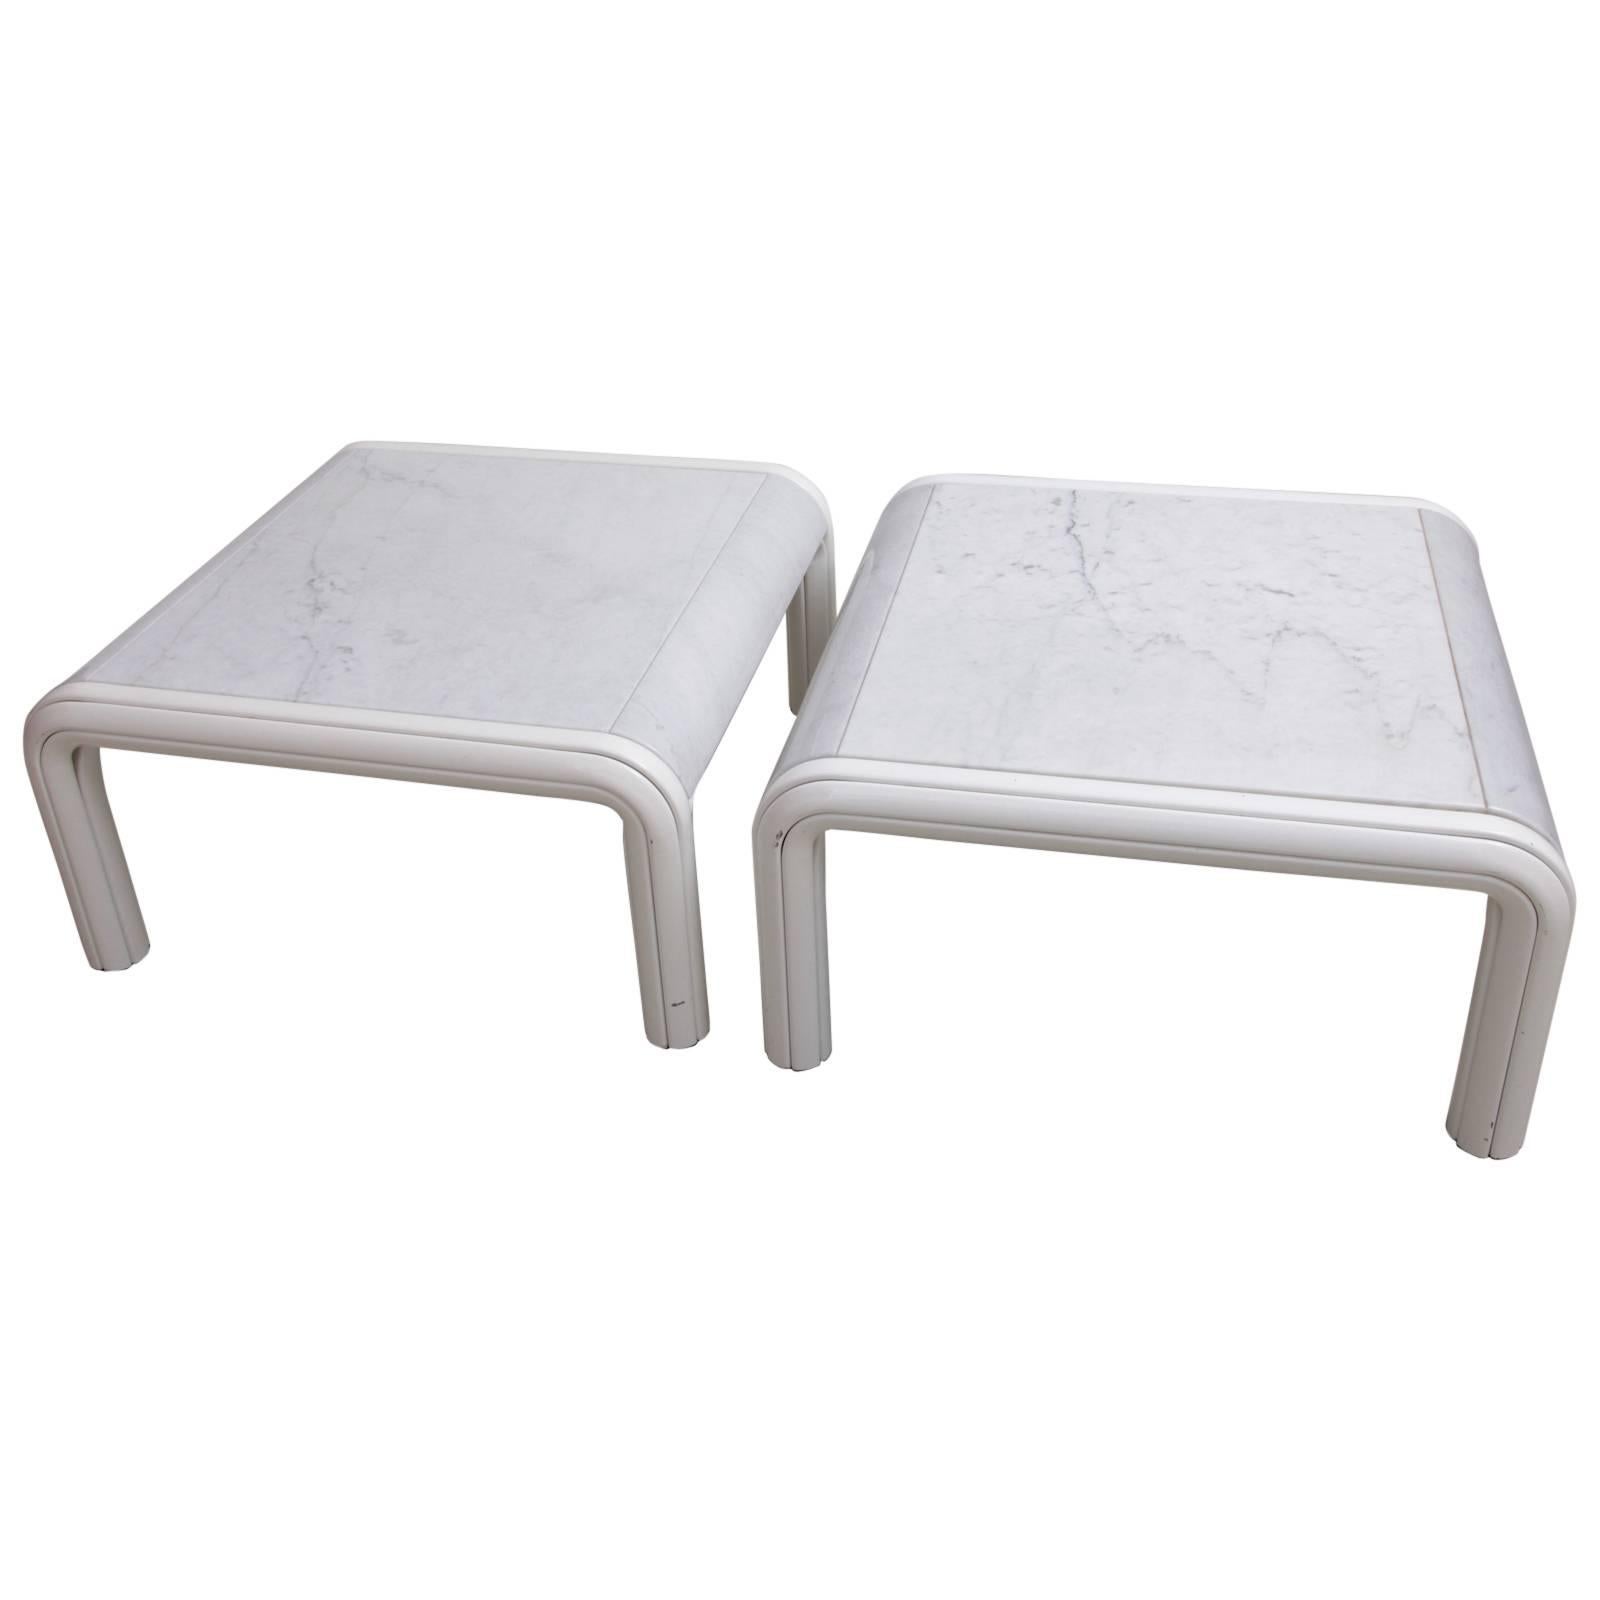 Rare Pair of Marble Coffee or Sofa Tables by Gae Aulenti for Knoll, Italy, 1970s For Sale